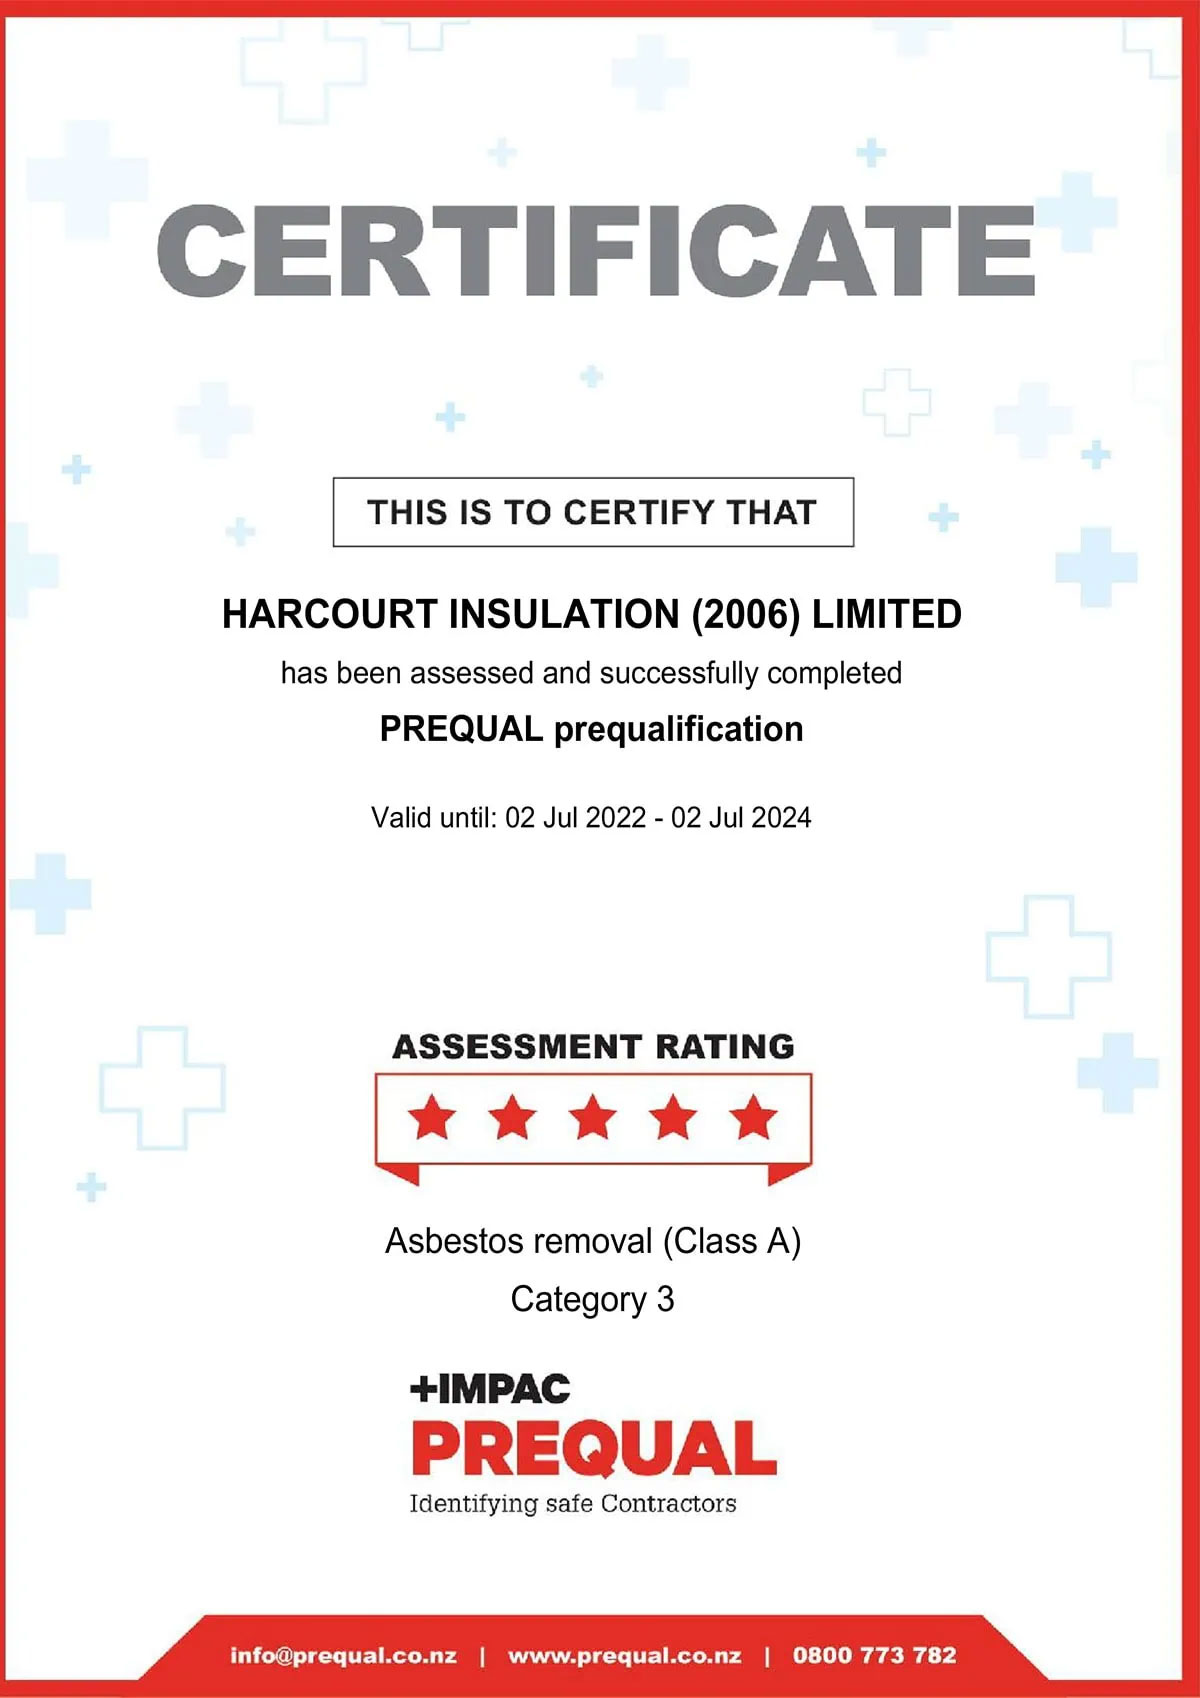 Harcourt-insulation-and-asbestos-removal-services-in-Aukland-and-Christchurch-licence-10